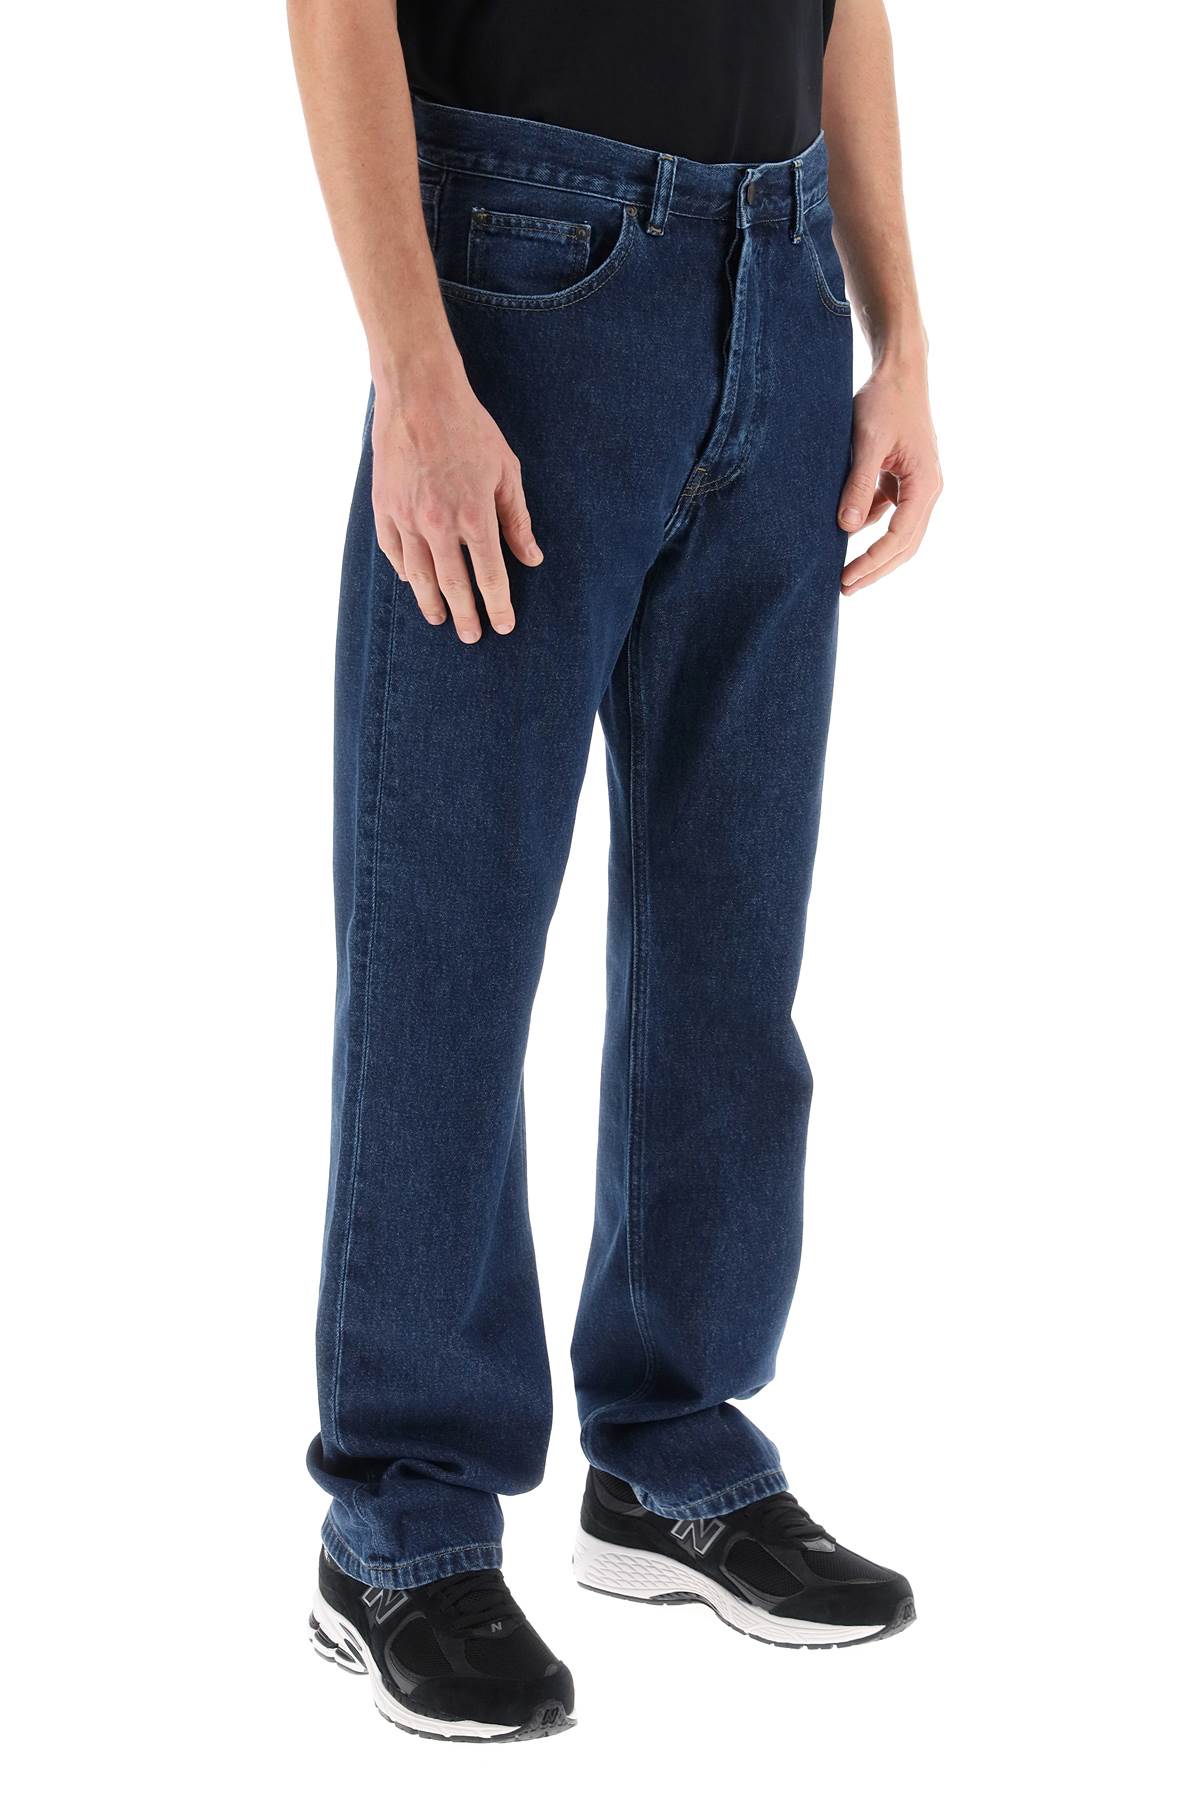 Carhartt wip nolan relaxed fit jeans-1